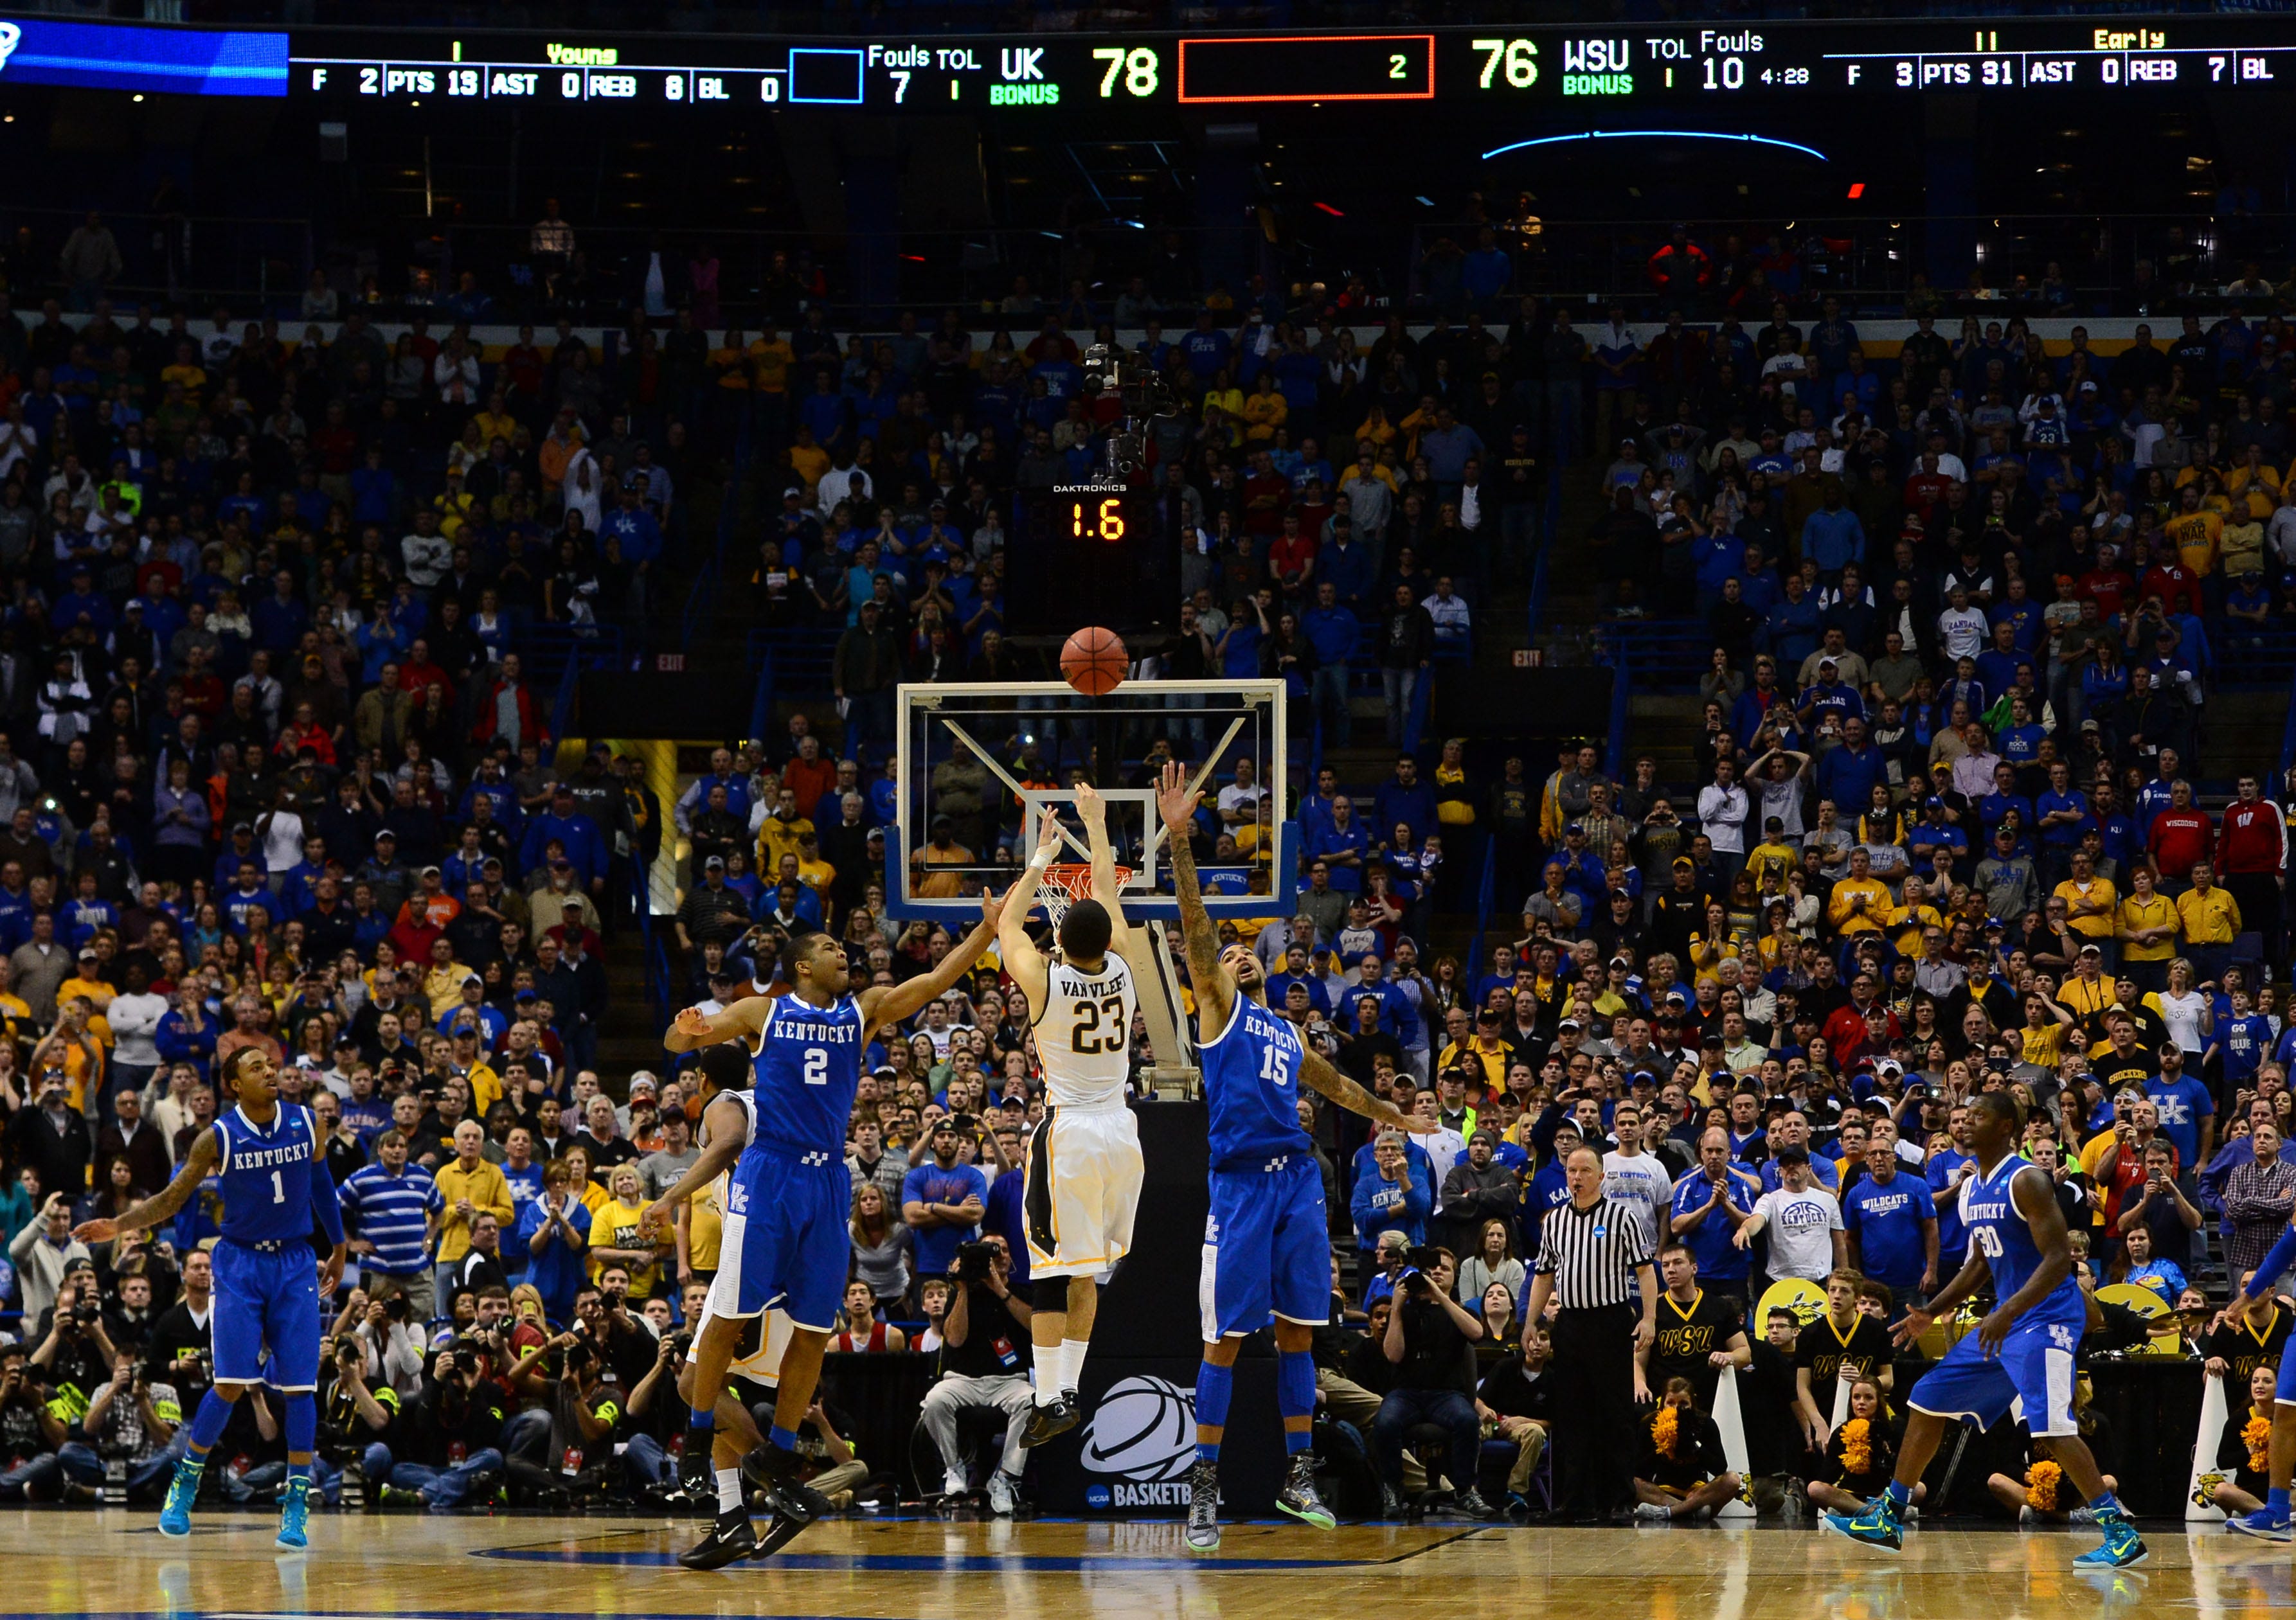 Wichita State guard Fred VanVleet takes a 3-point shot while defended by Kentucky forward Willie Cauley-Stein (15) and Aaron Harrison (2) at the 2014 NCAA Tournament.